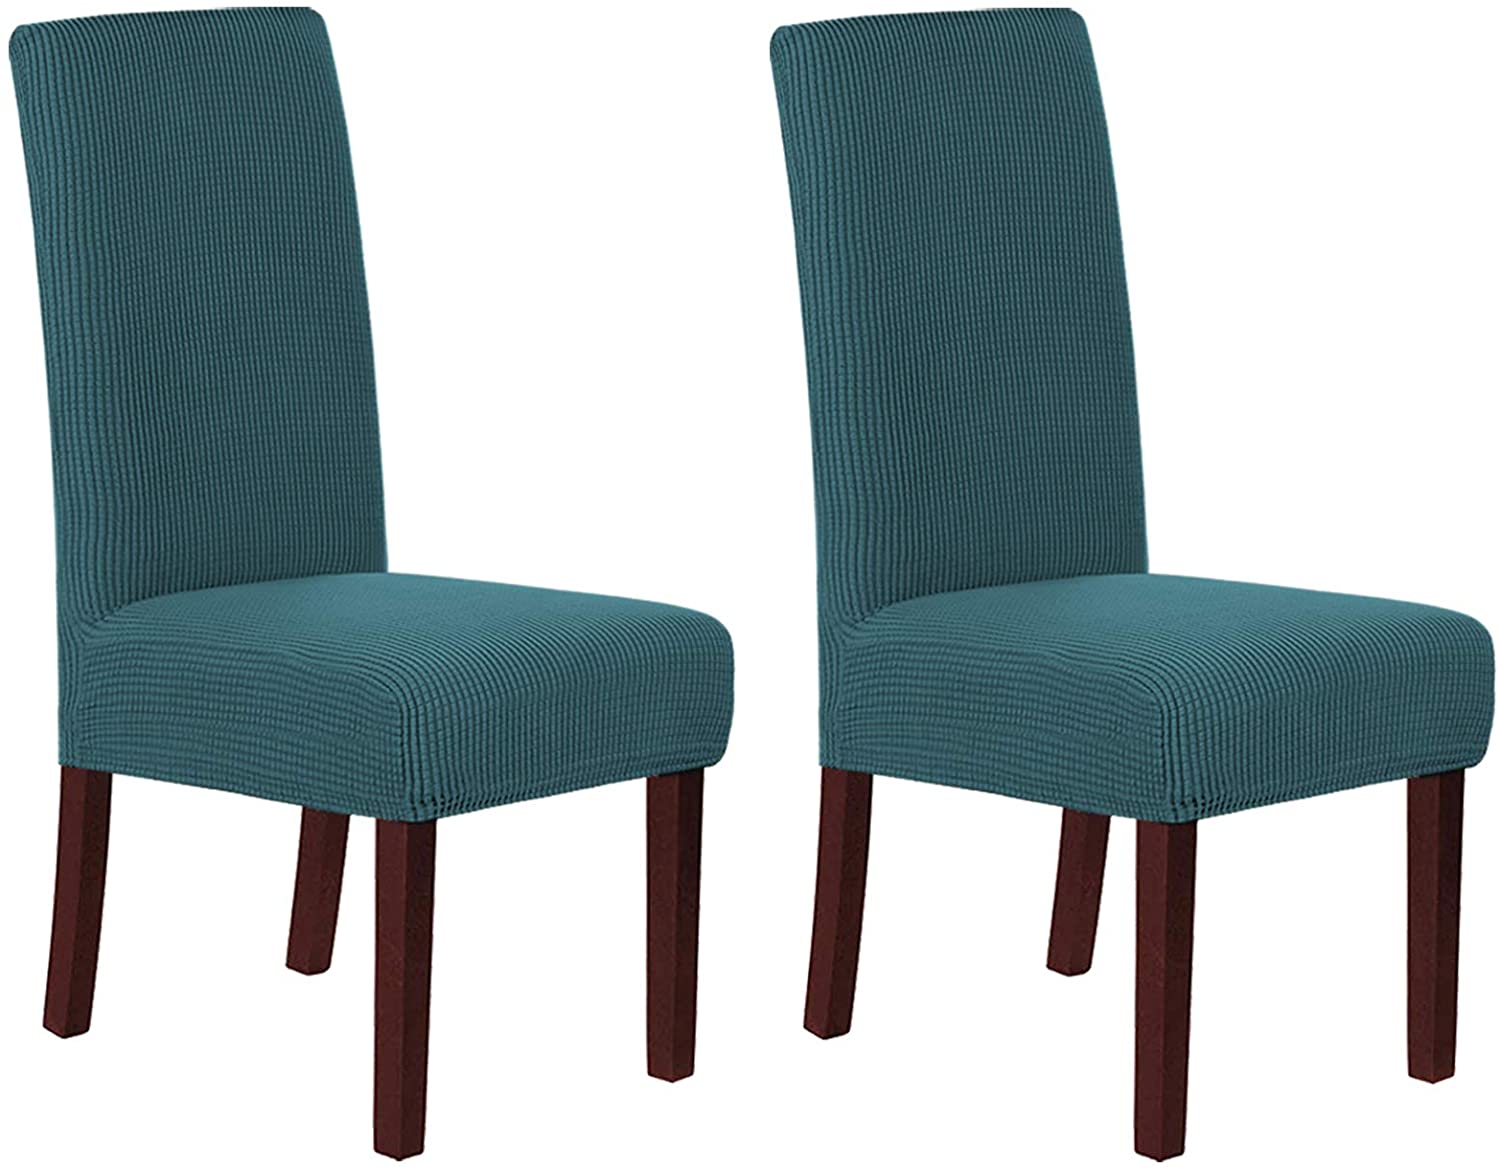 Dining Chair Cover, Form Fitting Soft Jacquard Geometric Parson Chair Slipcover (Set of 2) - Linen Universe Co.